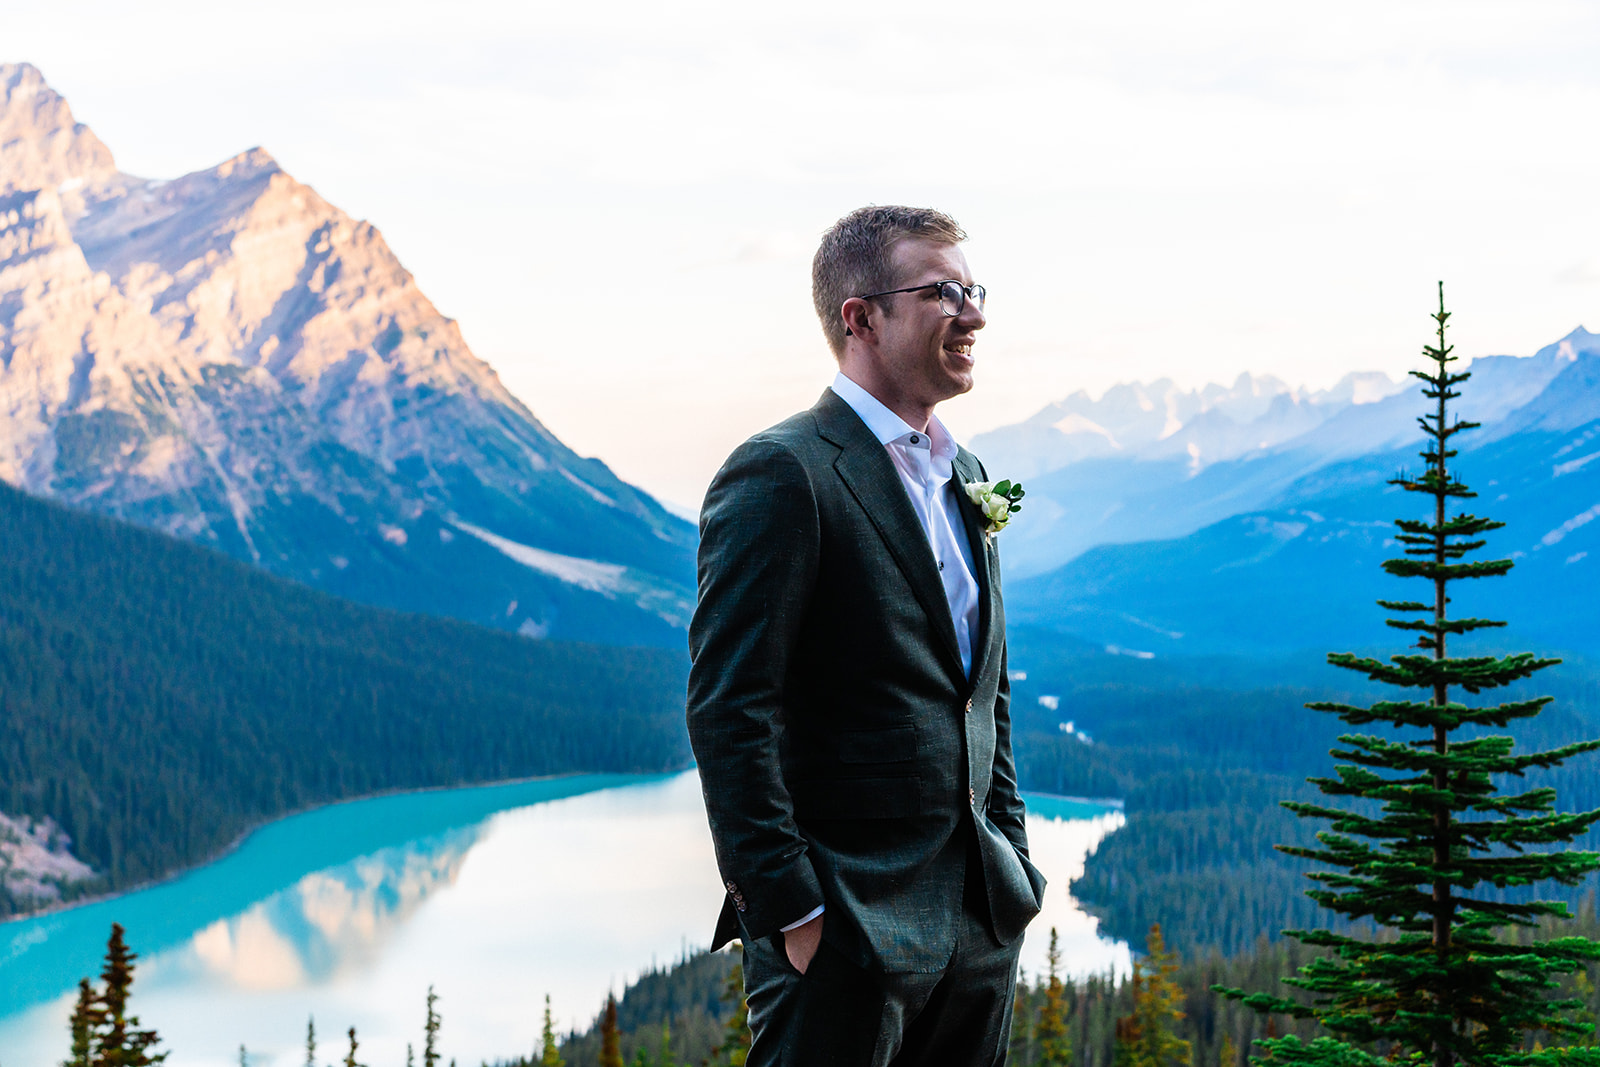 Groom posing in suite with the view of the Banff mountains